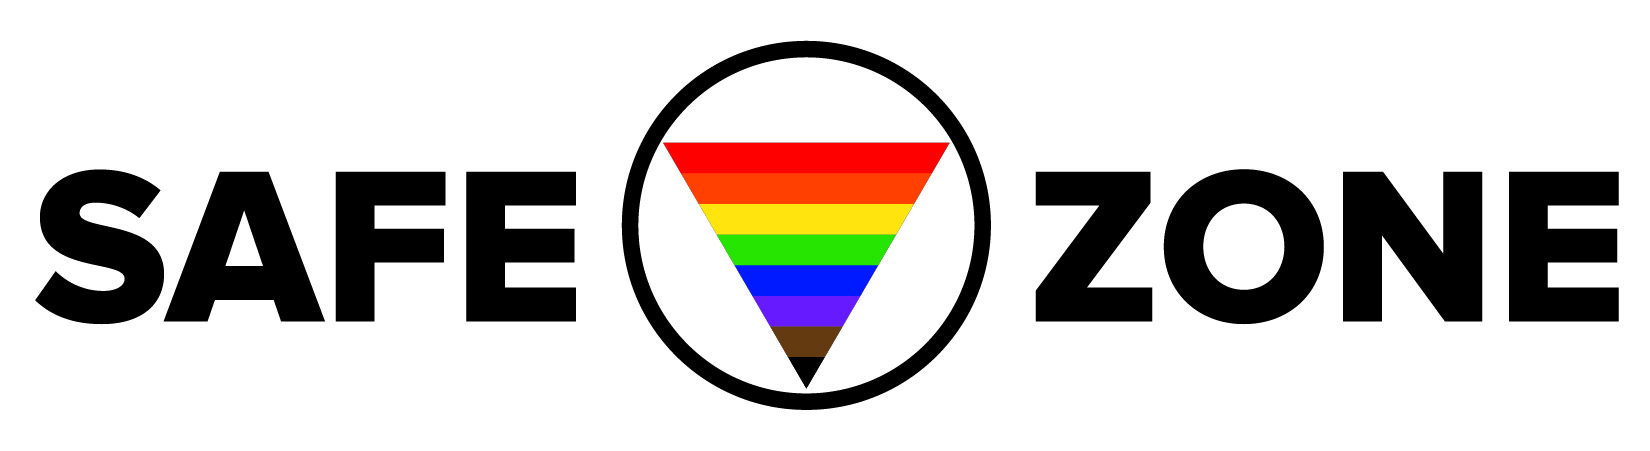 A circle with an upside down rainbow-colored triangle similar to the Pride Flag